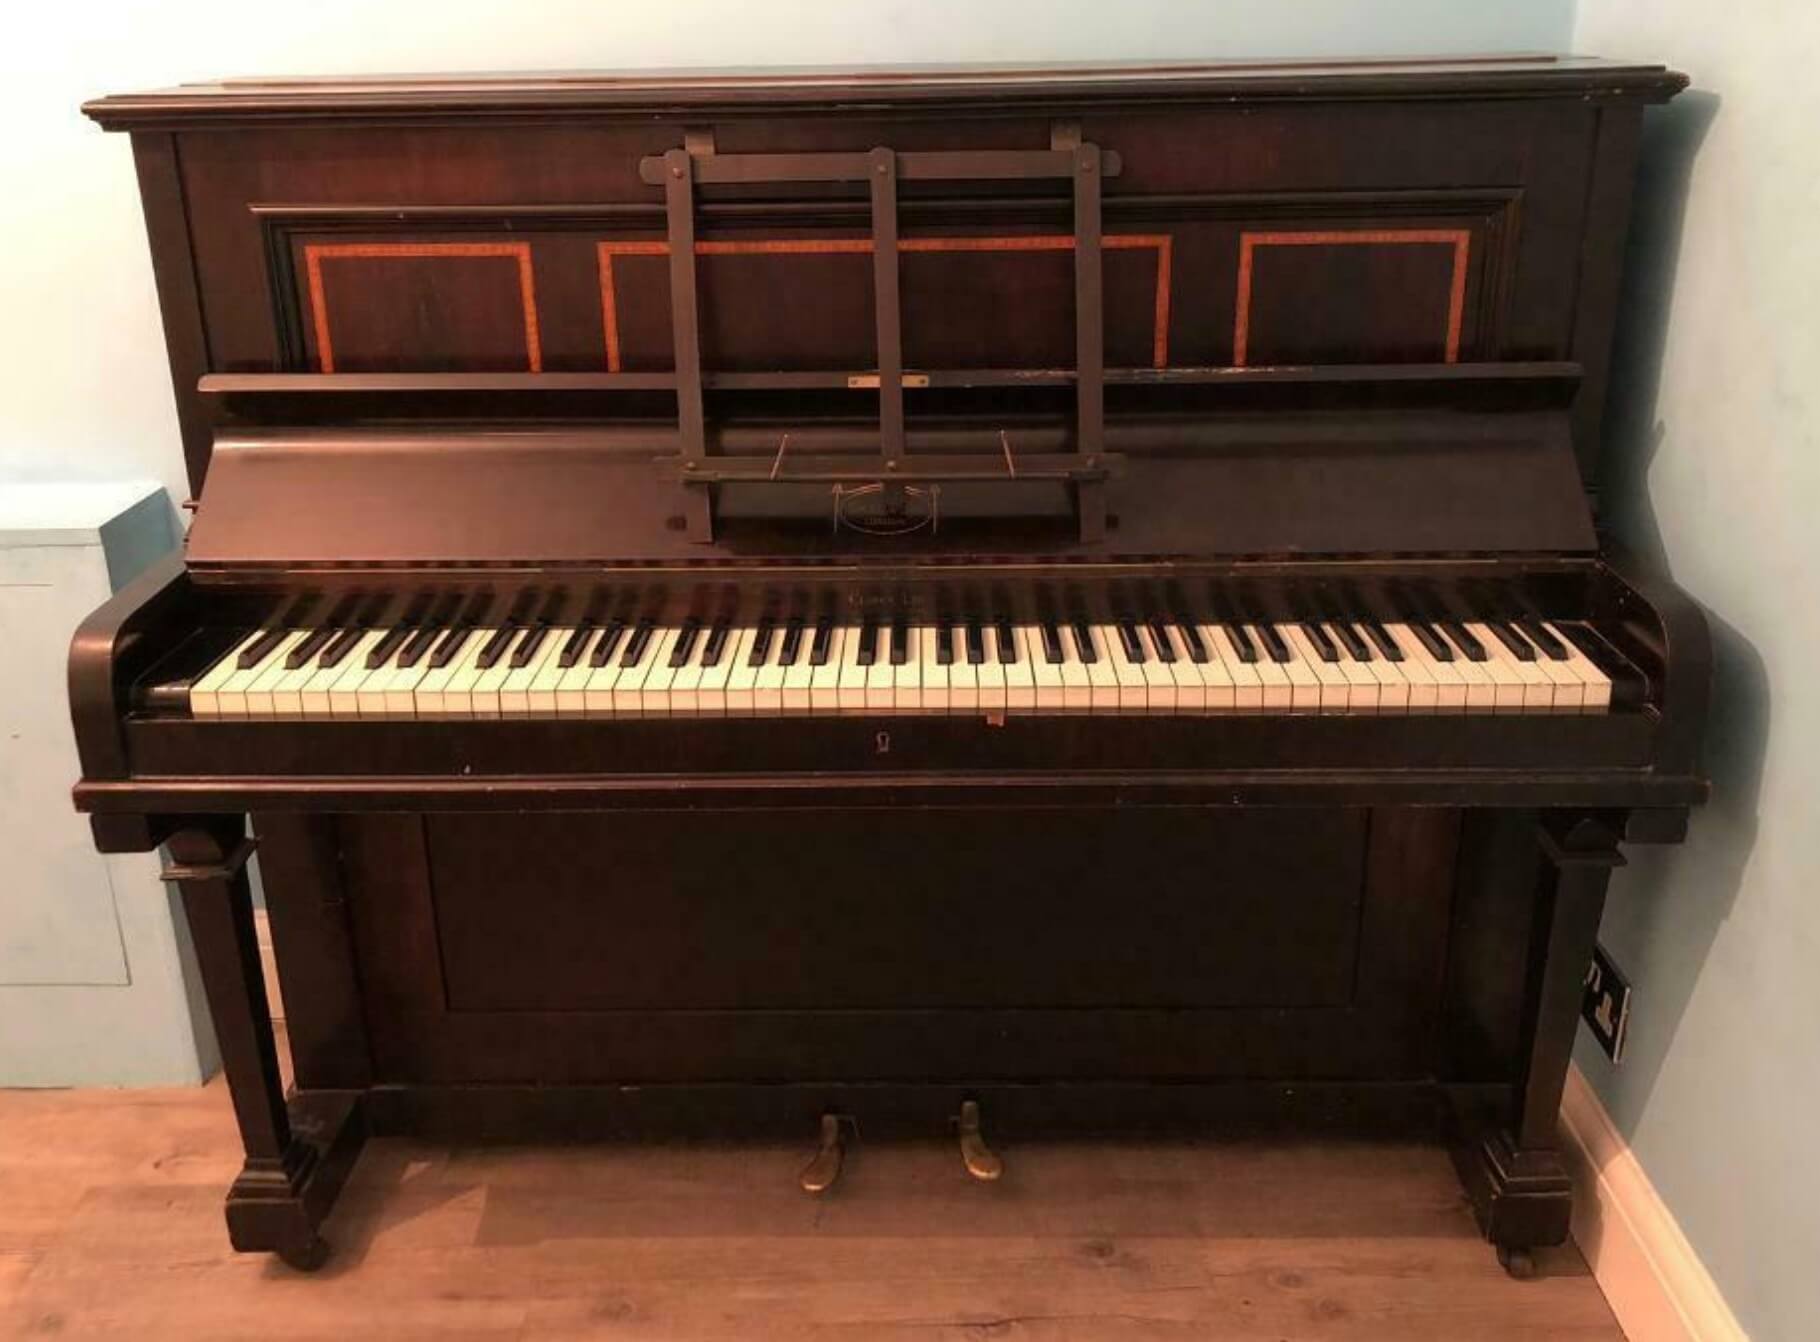 9 Reasons NOT to buy that cheap or free piano online!